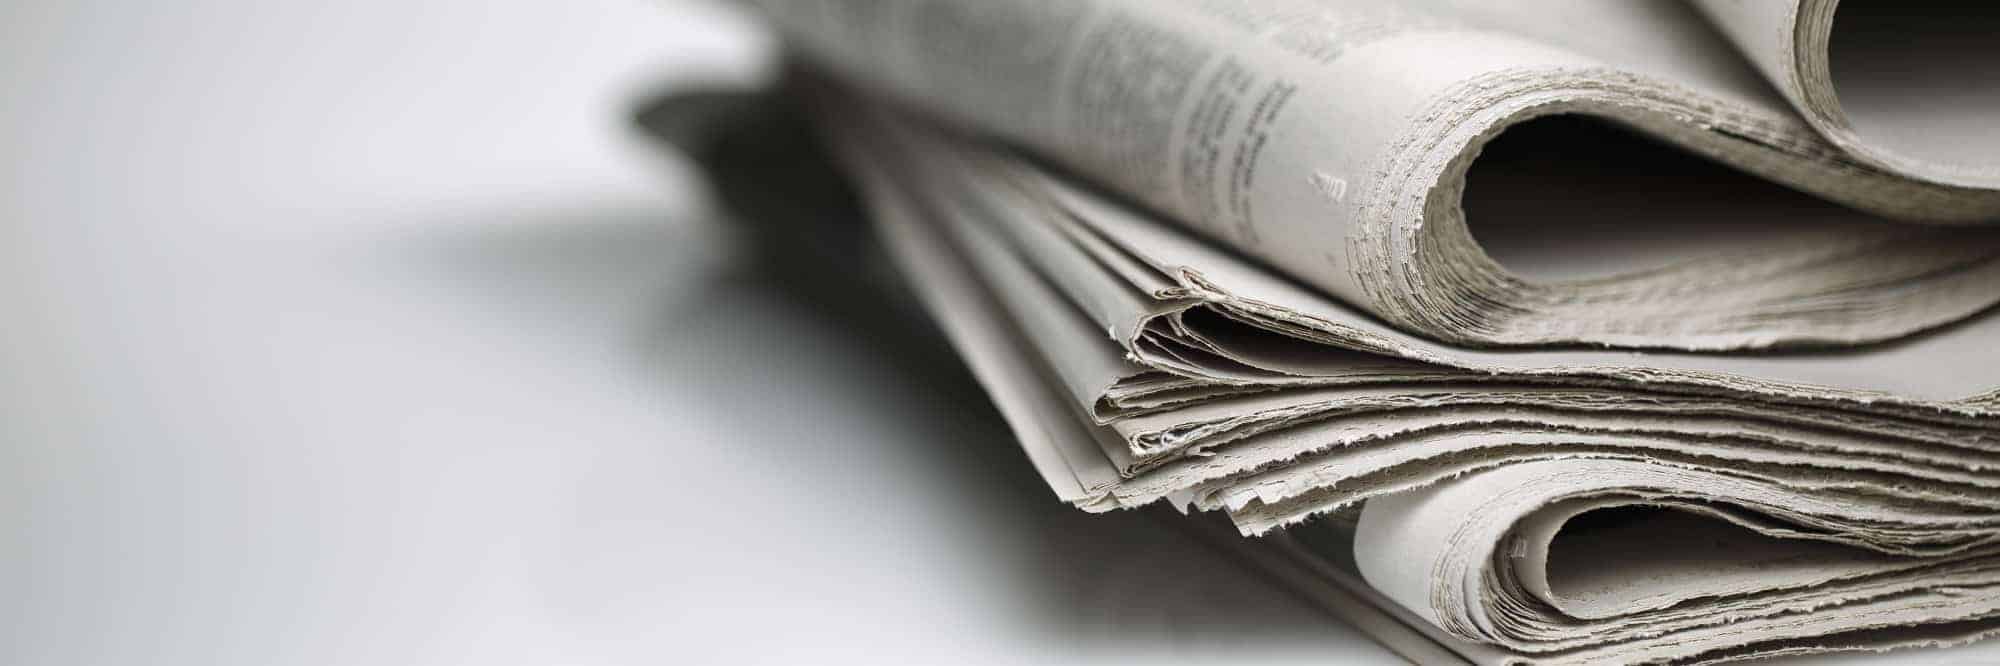 Photo of newspapers against plain background shot with very shallow depth of field